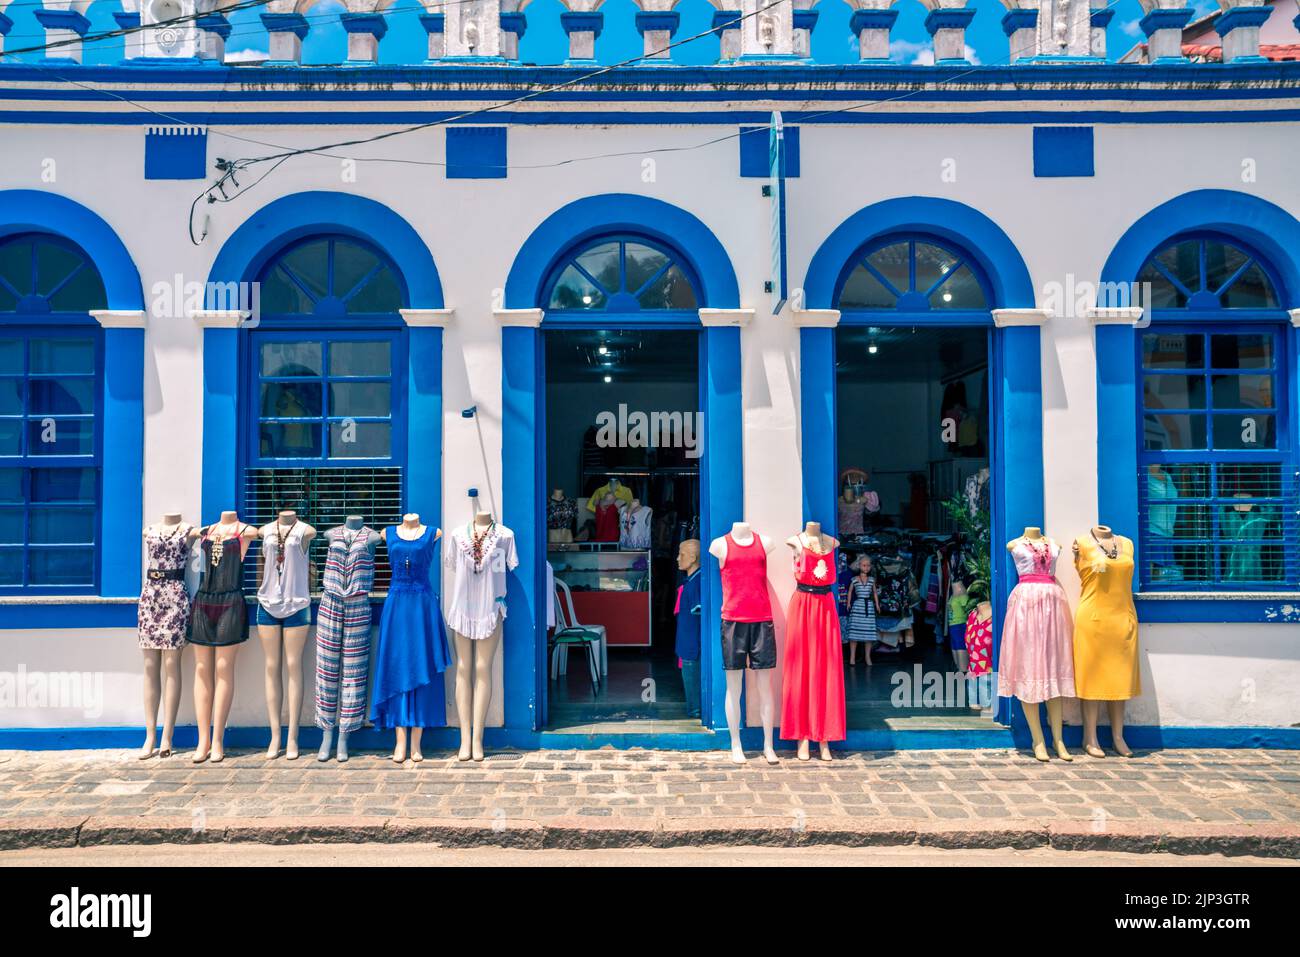 Facade of a clothing store with mannequins display on the sidewalk Stock Photo